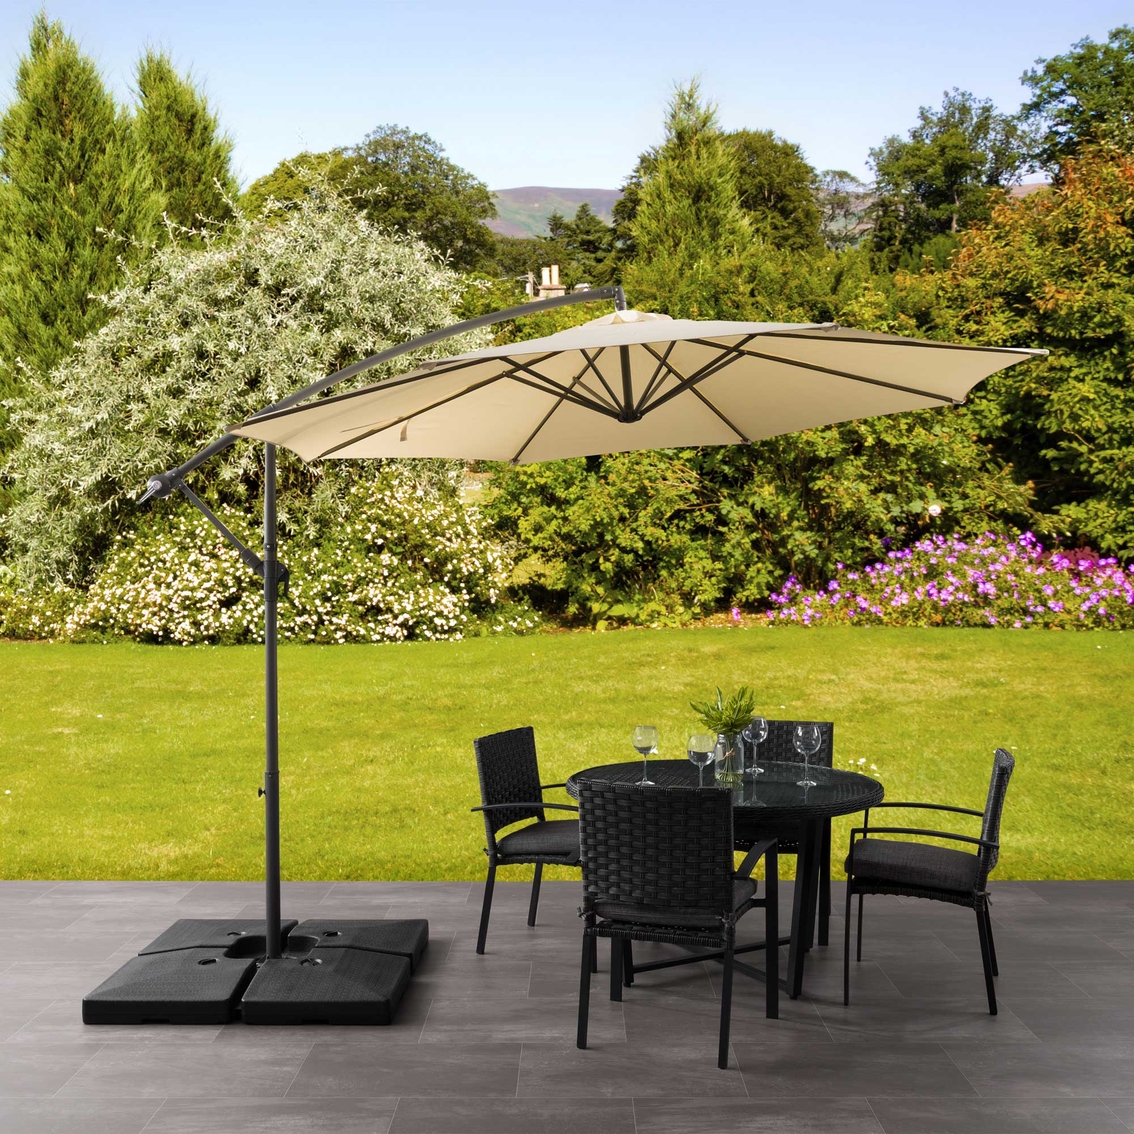 CorLiving PPU-410-Z1 9.5 ft. UV Resistant Offset Patio Umbrella and Base - Image 4 of 4